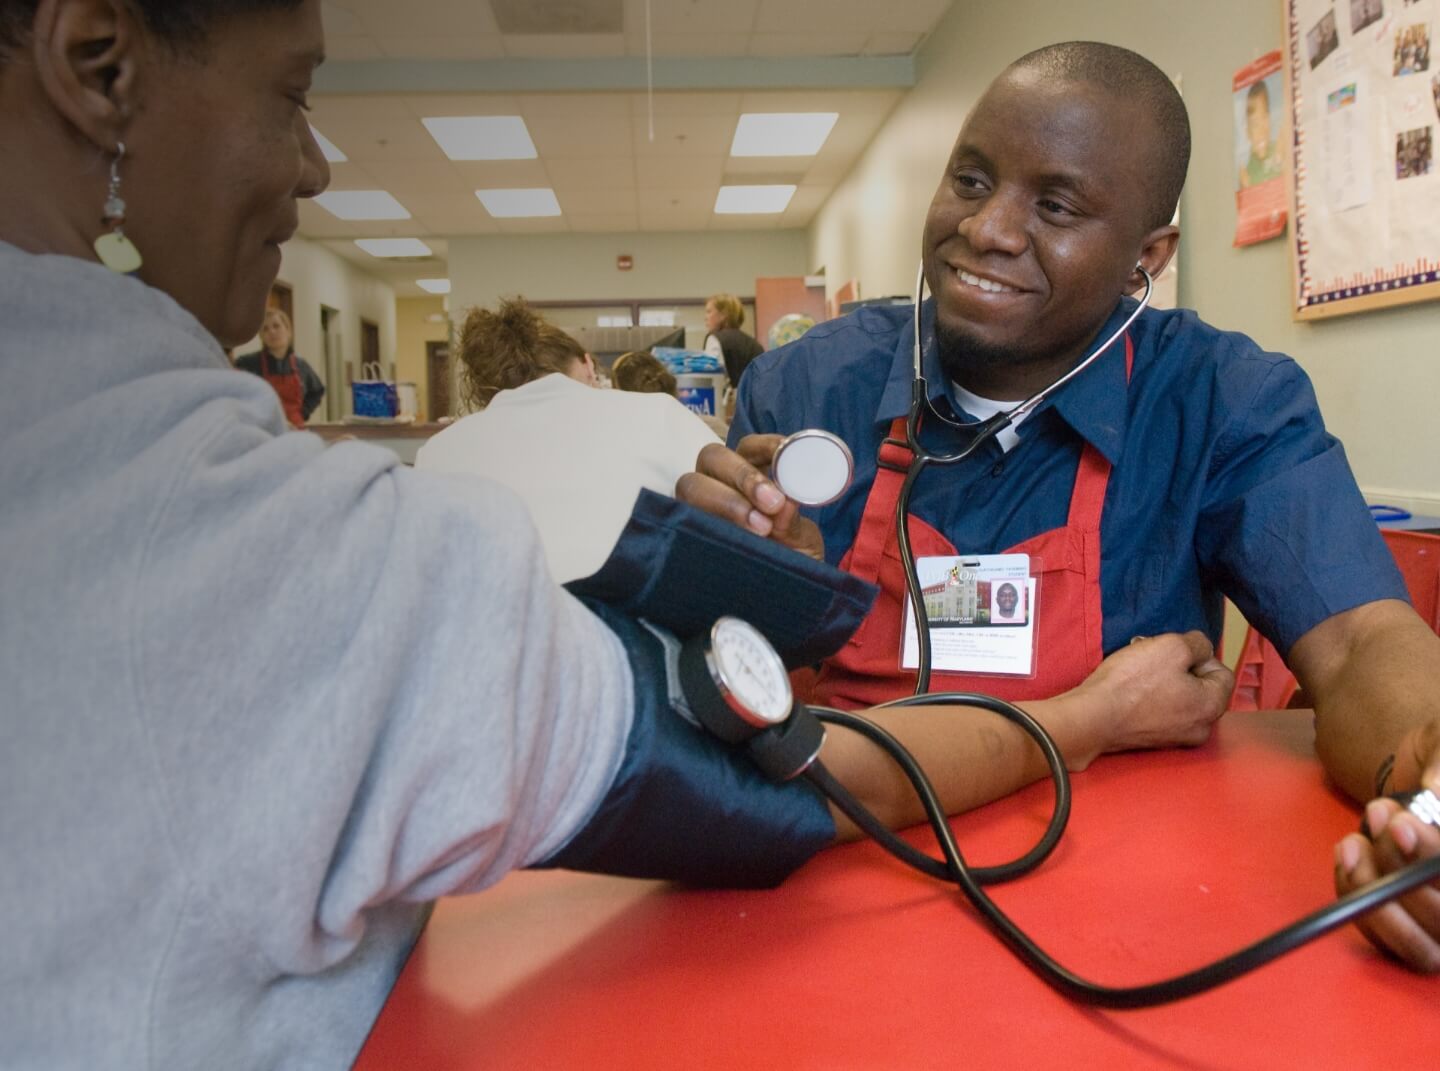 A University of Maryland School of Nursing student performs a blood pressure test at a community clinic